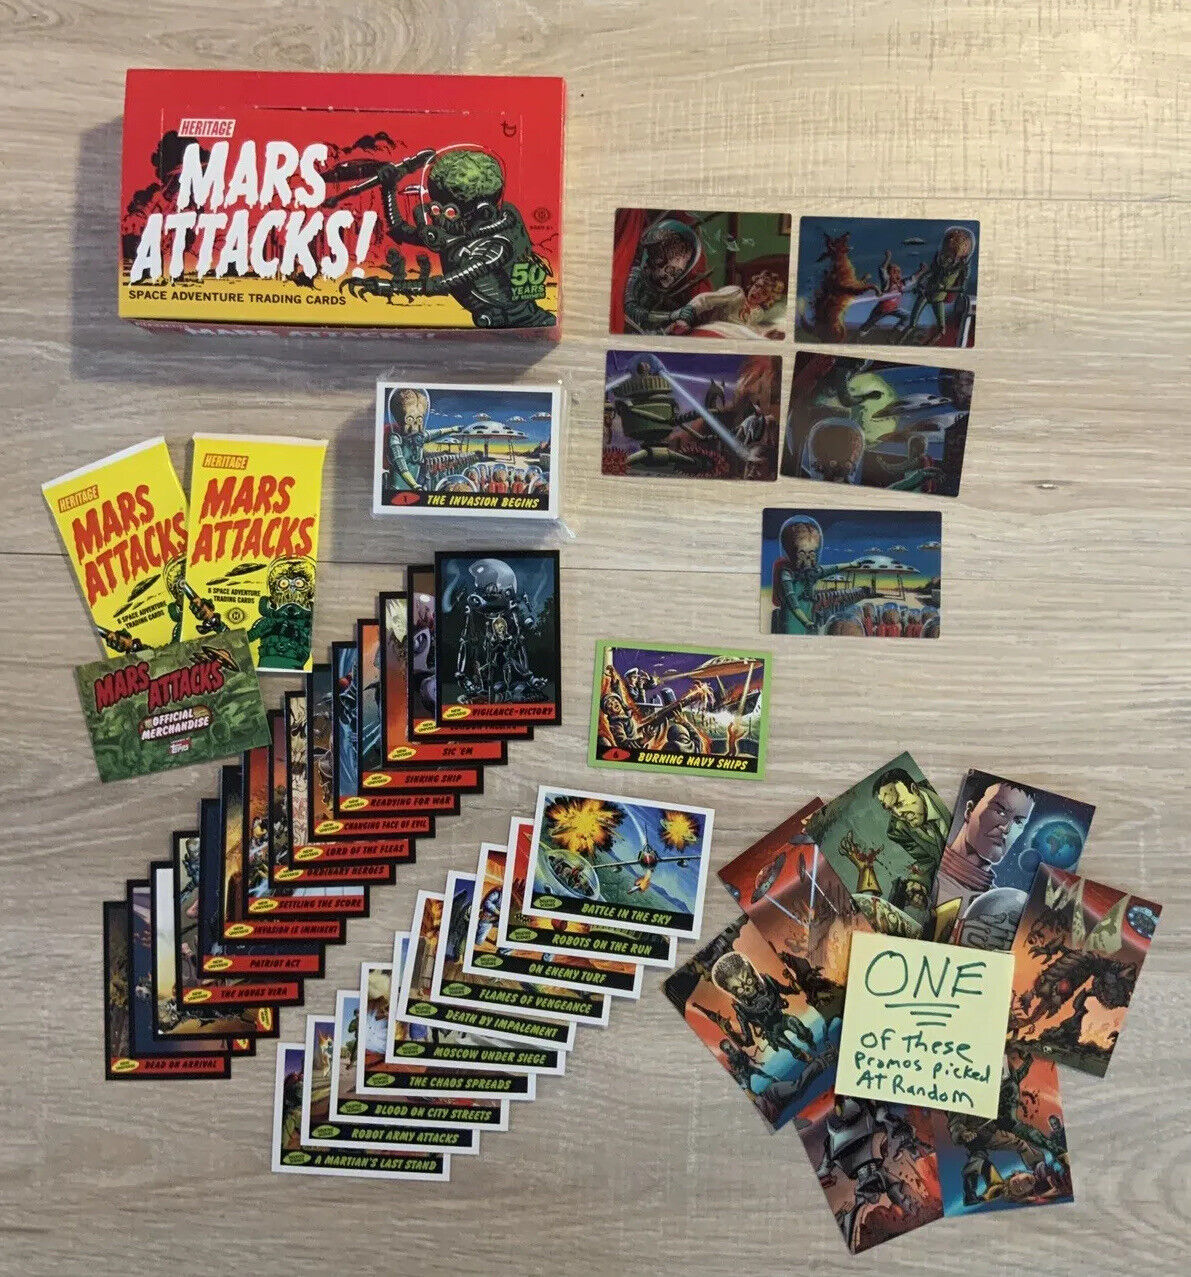 MARS ATTACKS HERITAGE 2012 Set 3D COMPLETE 55 SET Subsets Box Packs Hobby Retail